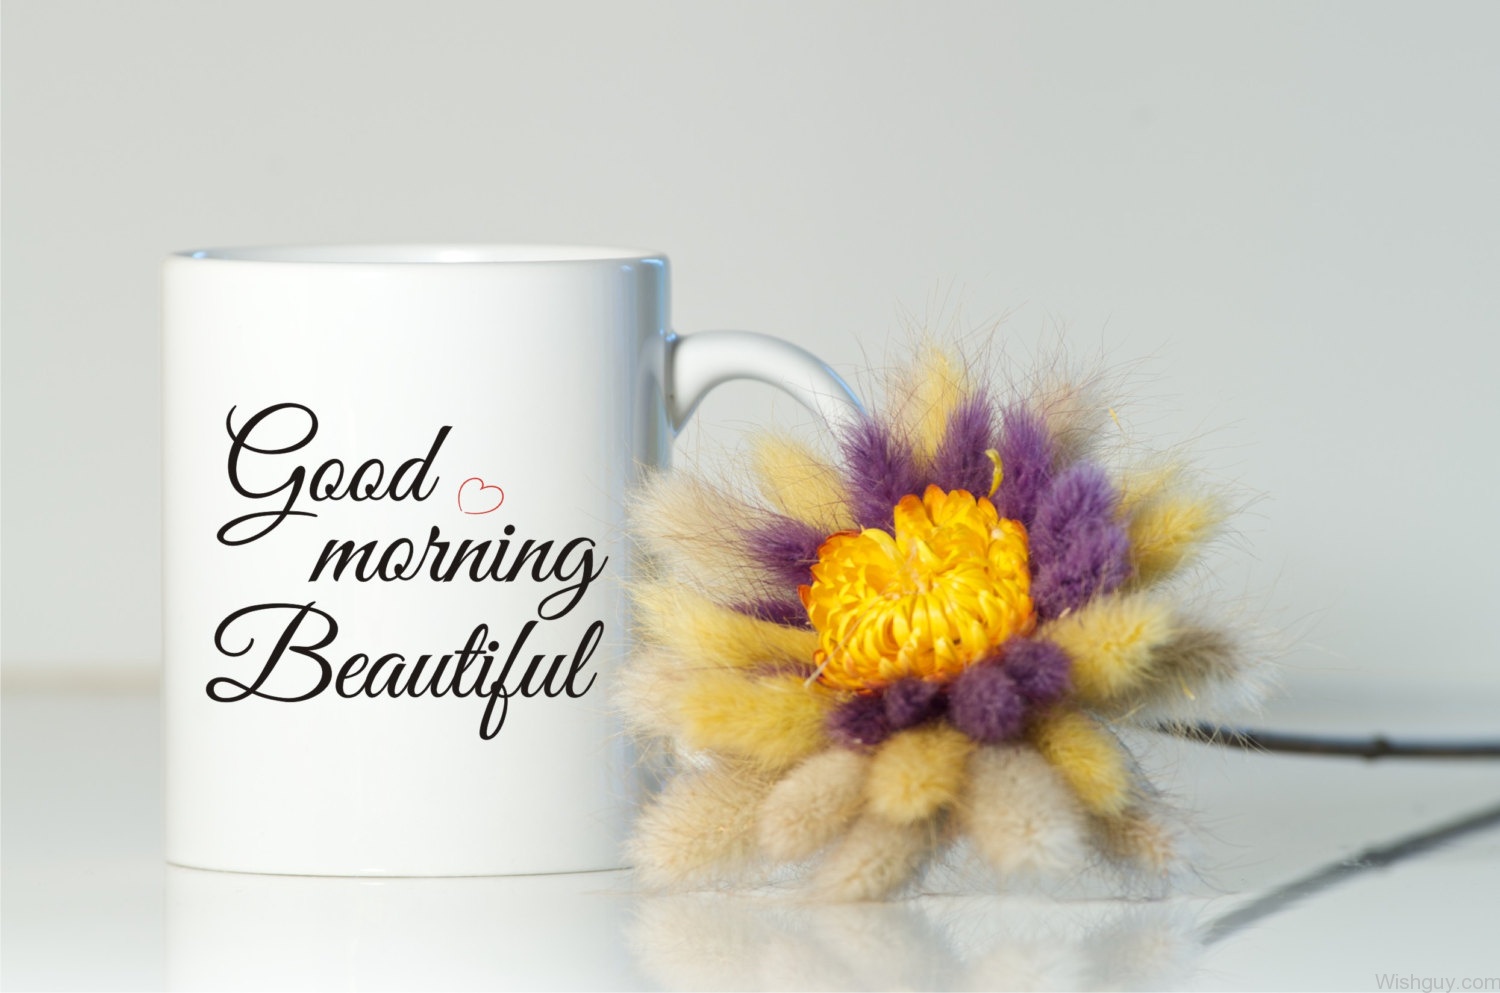 Good Morning My Beautiful - Wishes, Greetings, Pictures – Wish Guy